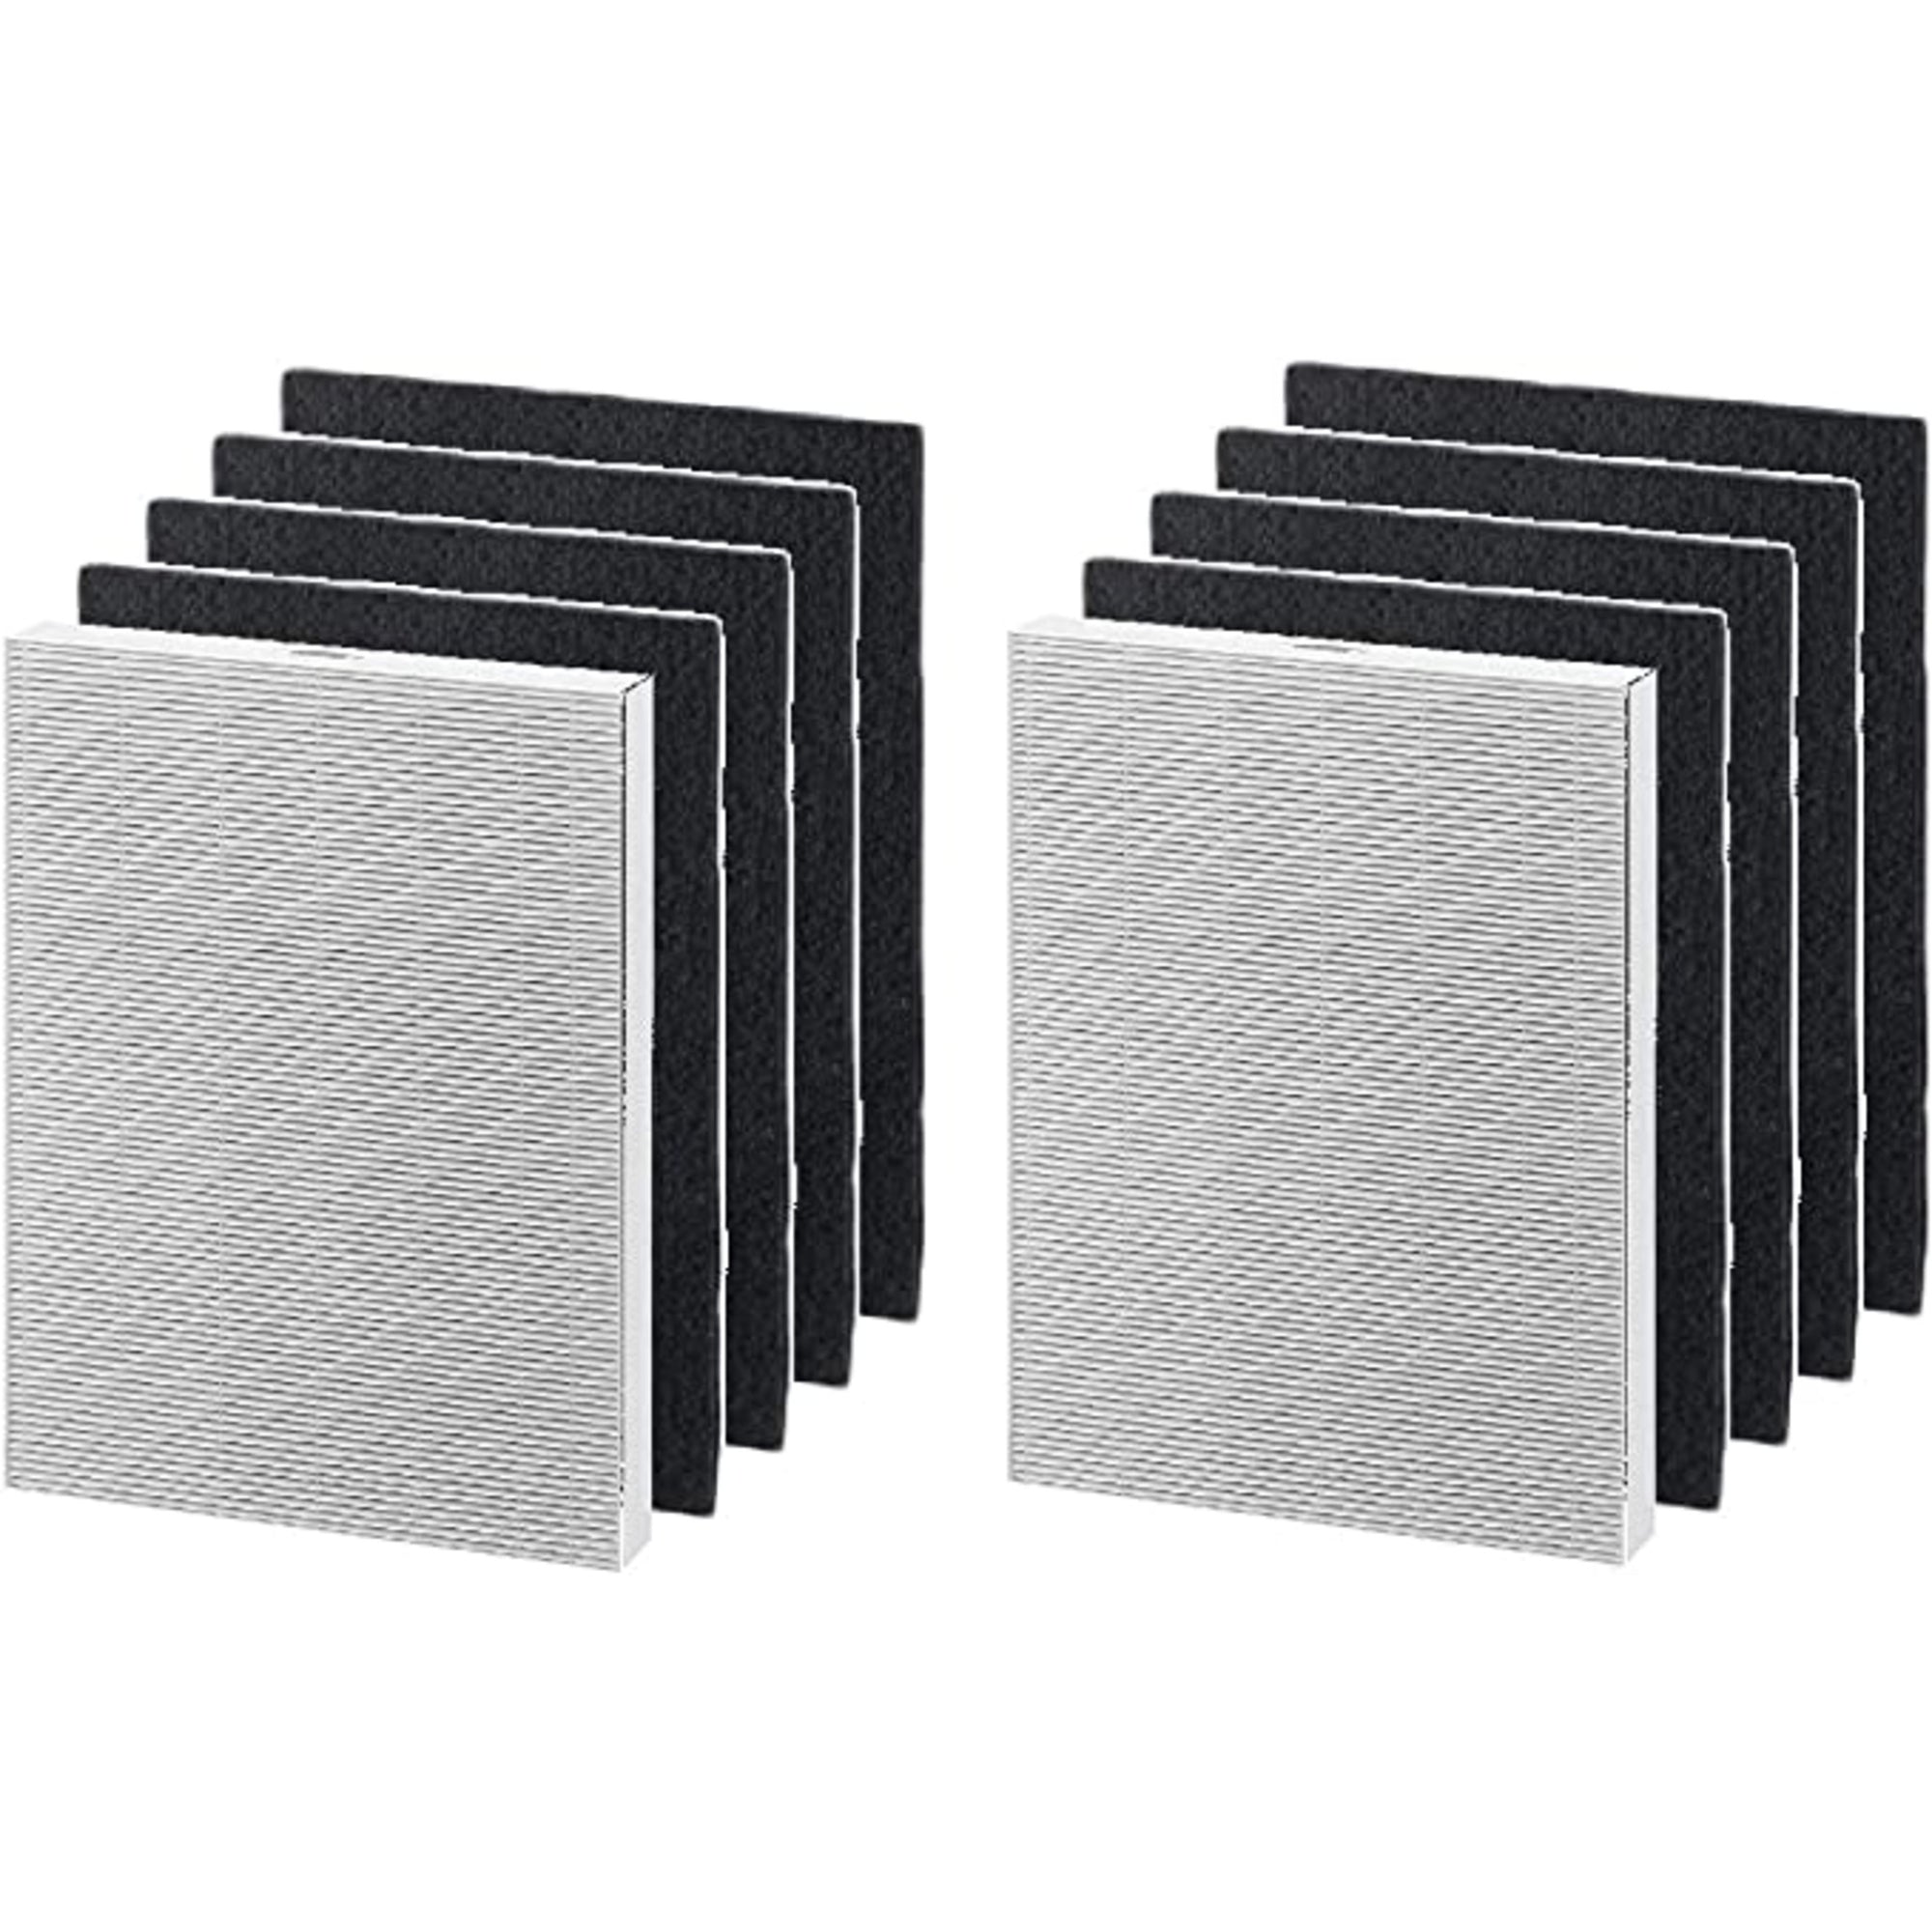 Nispira True HEPA Filter + Activated Carbon Pre Filter Set for Fellowes AeraMax Air Purifier 190, 200, DB55, DX55, 9287101